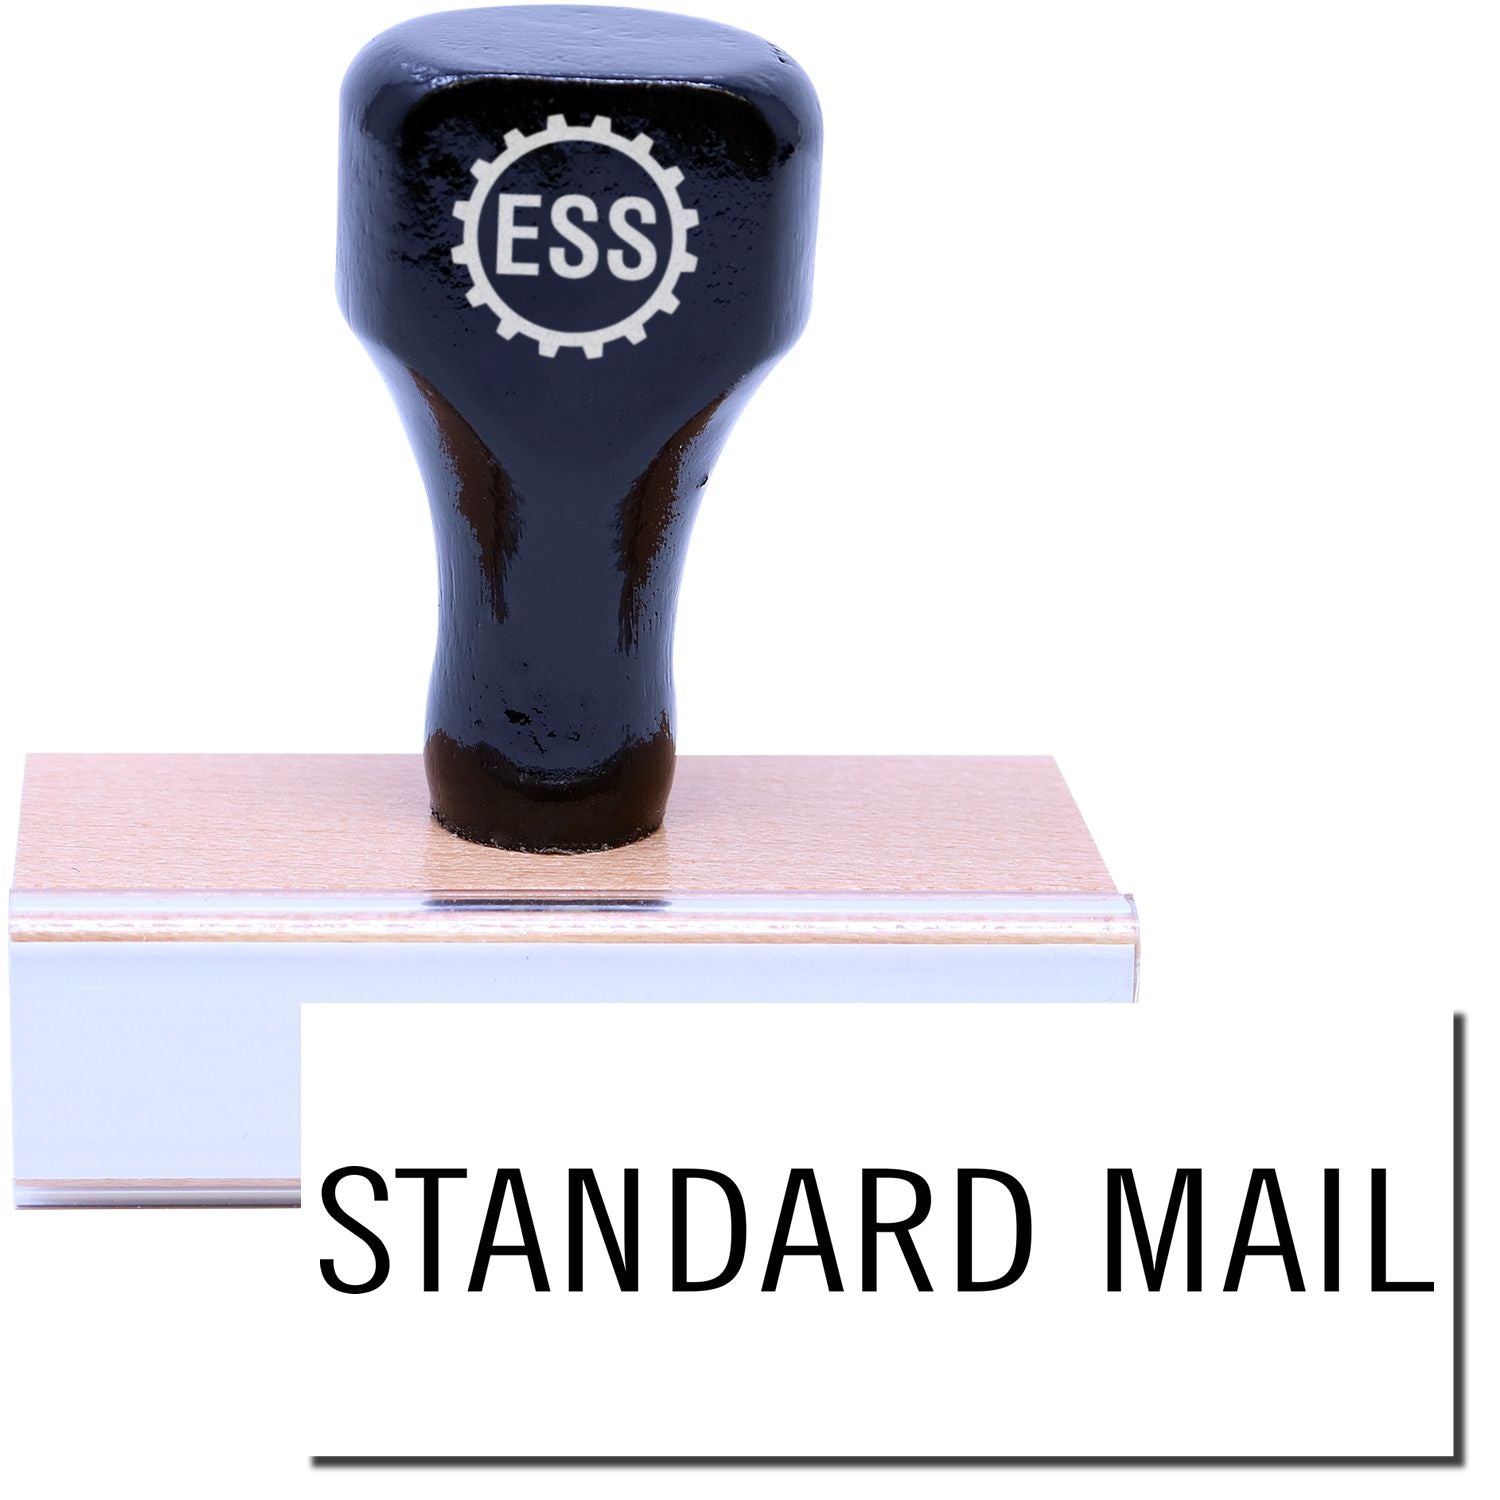 A stock office rubber stamp with a stamped image showing how the text "STANDARD MAIL" in a large font is displayed after stamping.